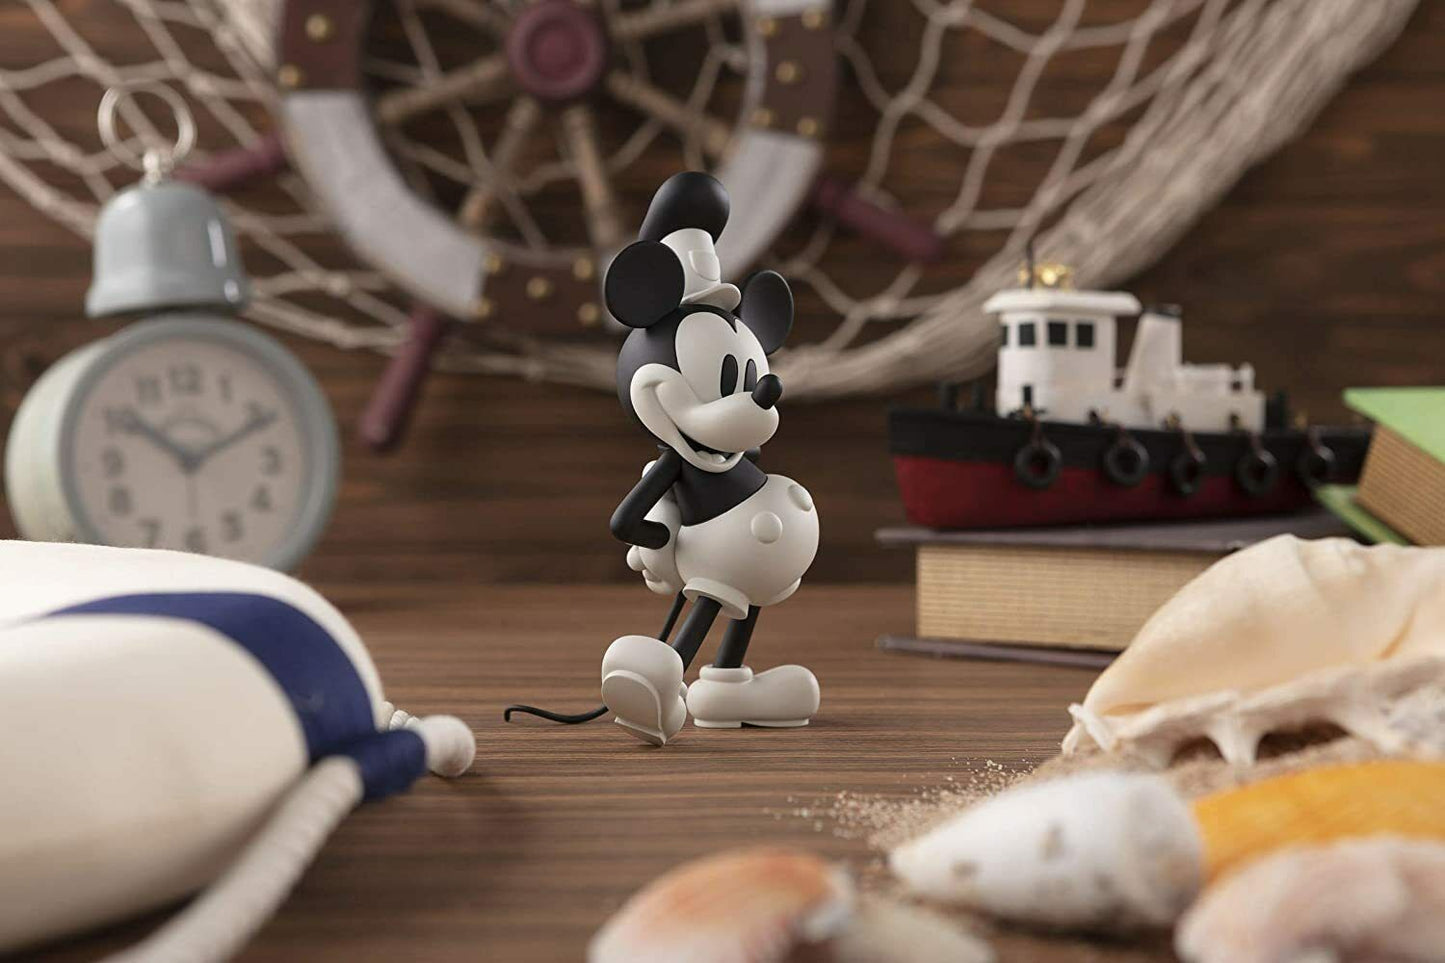 Figuarts Zero Mickey Mouse Steamboat Willie 90th Anniversary Limited Edition Disney